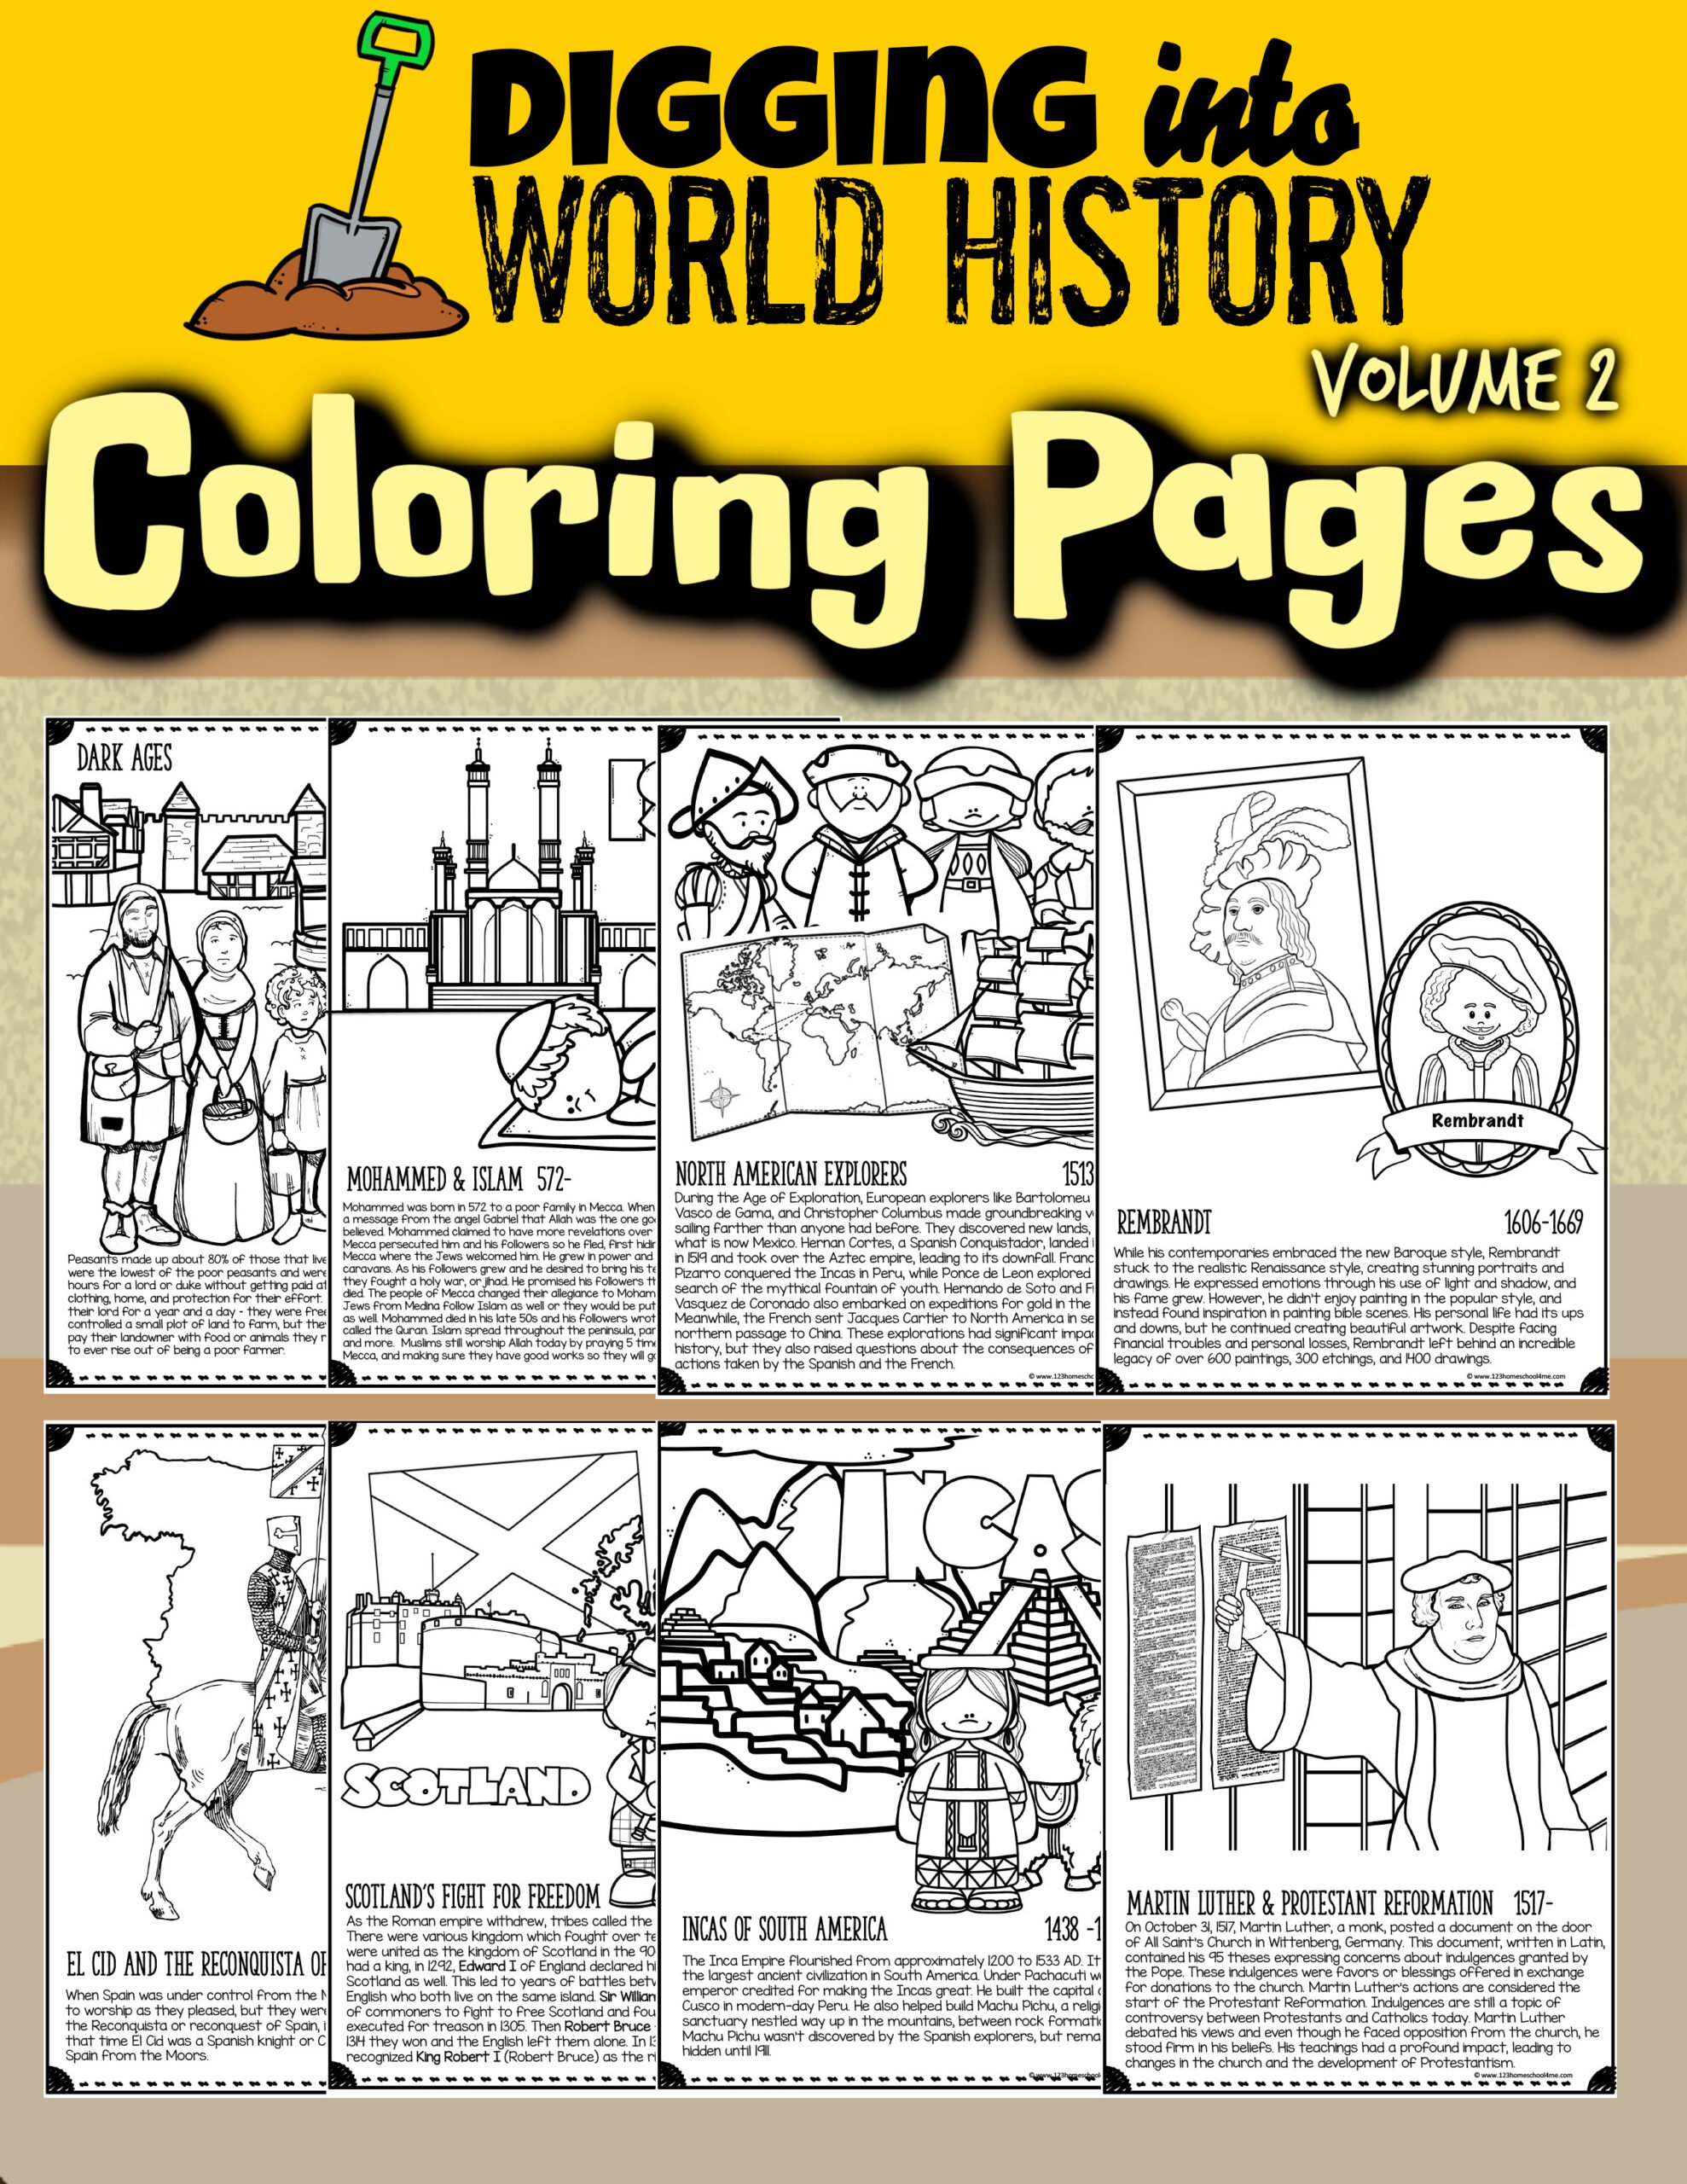 World history coloring pages vol